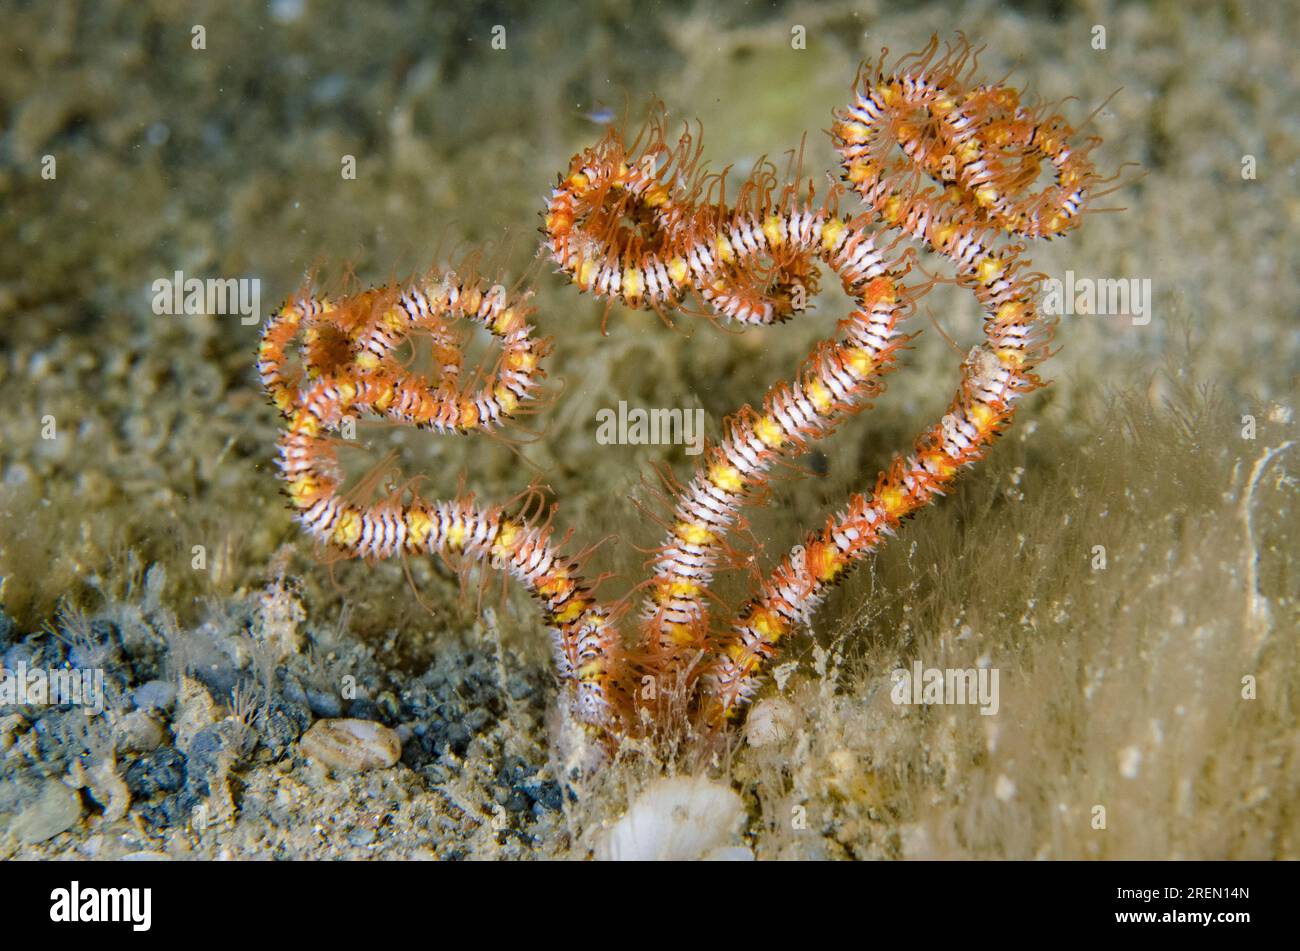 Burrowing Brittle Star, Amphiura sp, buried in sand, night dive, Dili Rock East dive site, Dili, East Timor Stock Photo